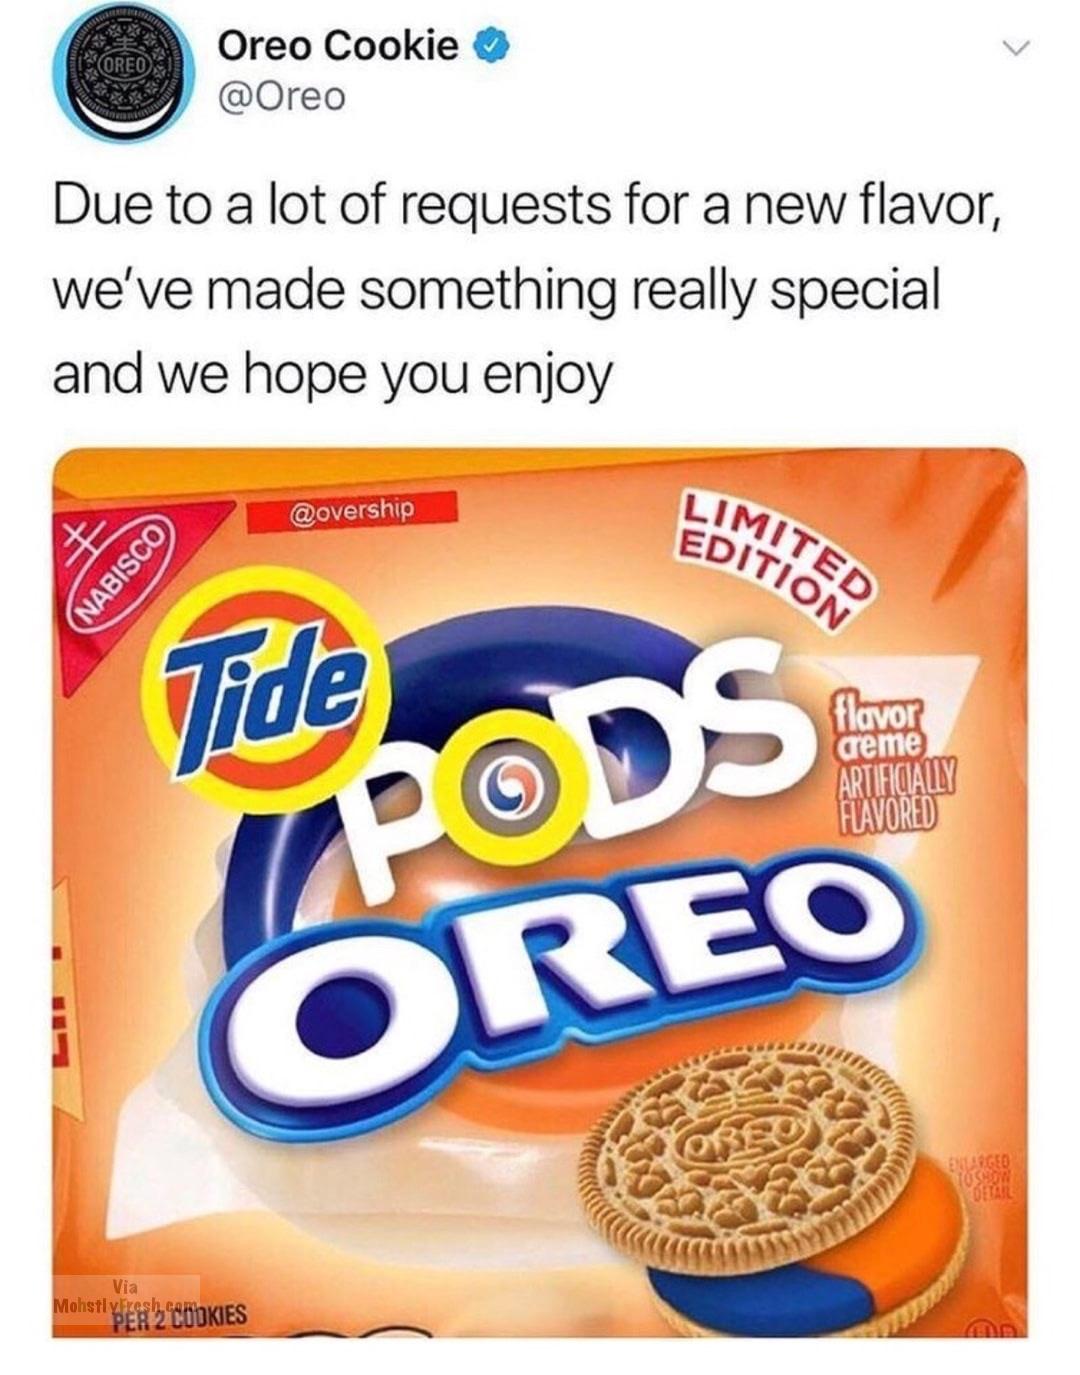 photoshopped tide pod oreo - Pored Oreo Cookie Due to a lot of requests for a new flavor, we've made something really special and we hope you enjoy Imited Edition Nabisco Tide flavor Pods Creme Artificially Flavored Creo Mohstylesh G Dokies